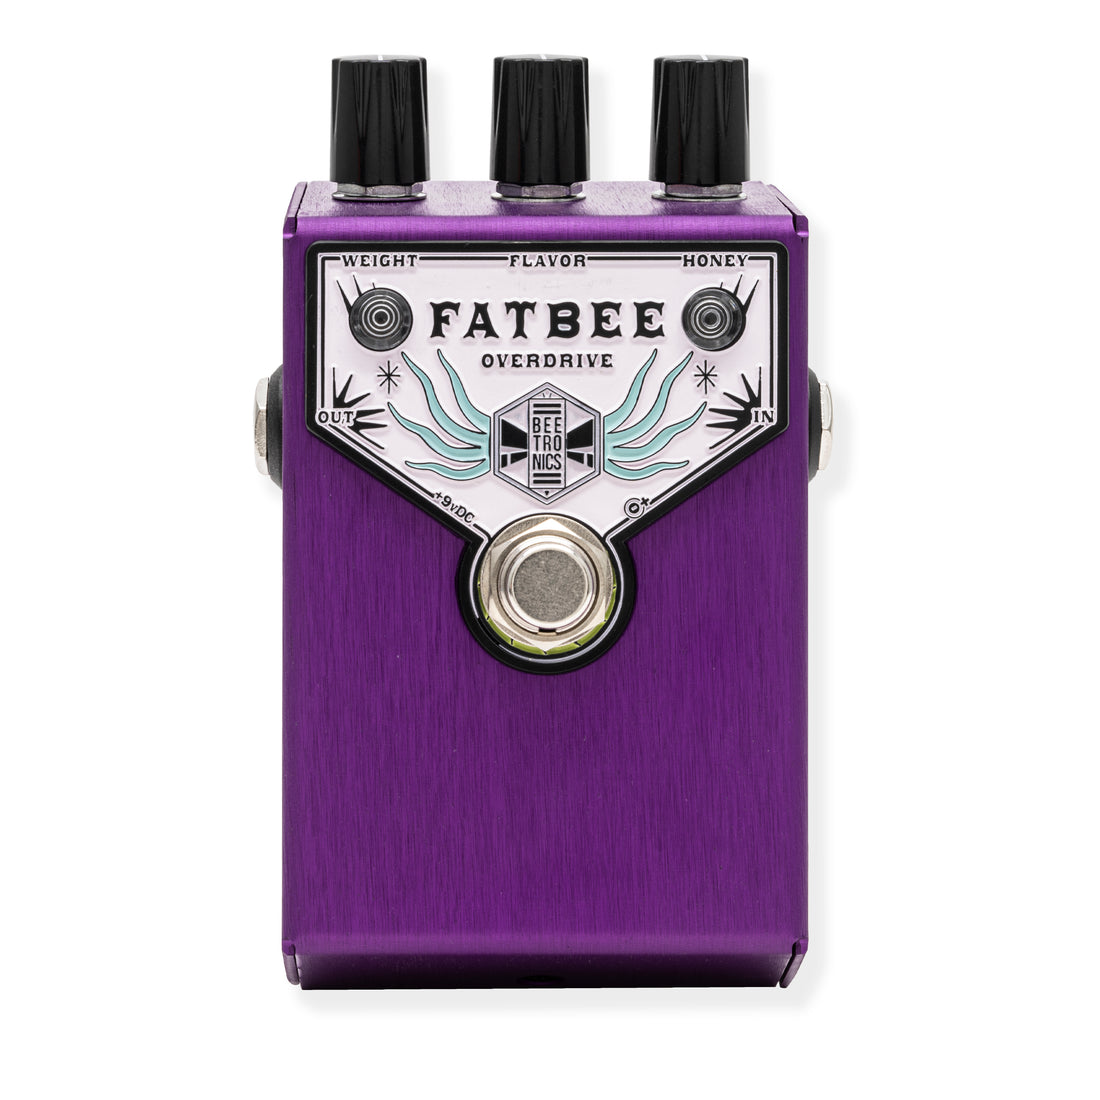 Fatbee Overdrive &lt;p&gt; Limited Edition &lt;p&gt; Bambee